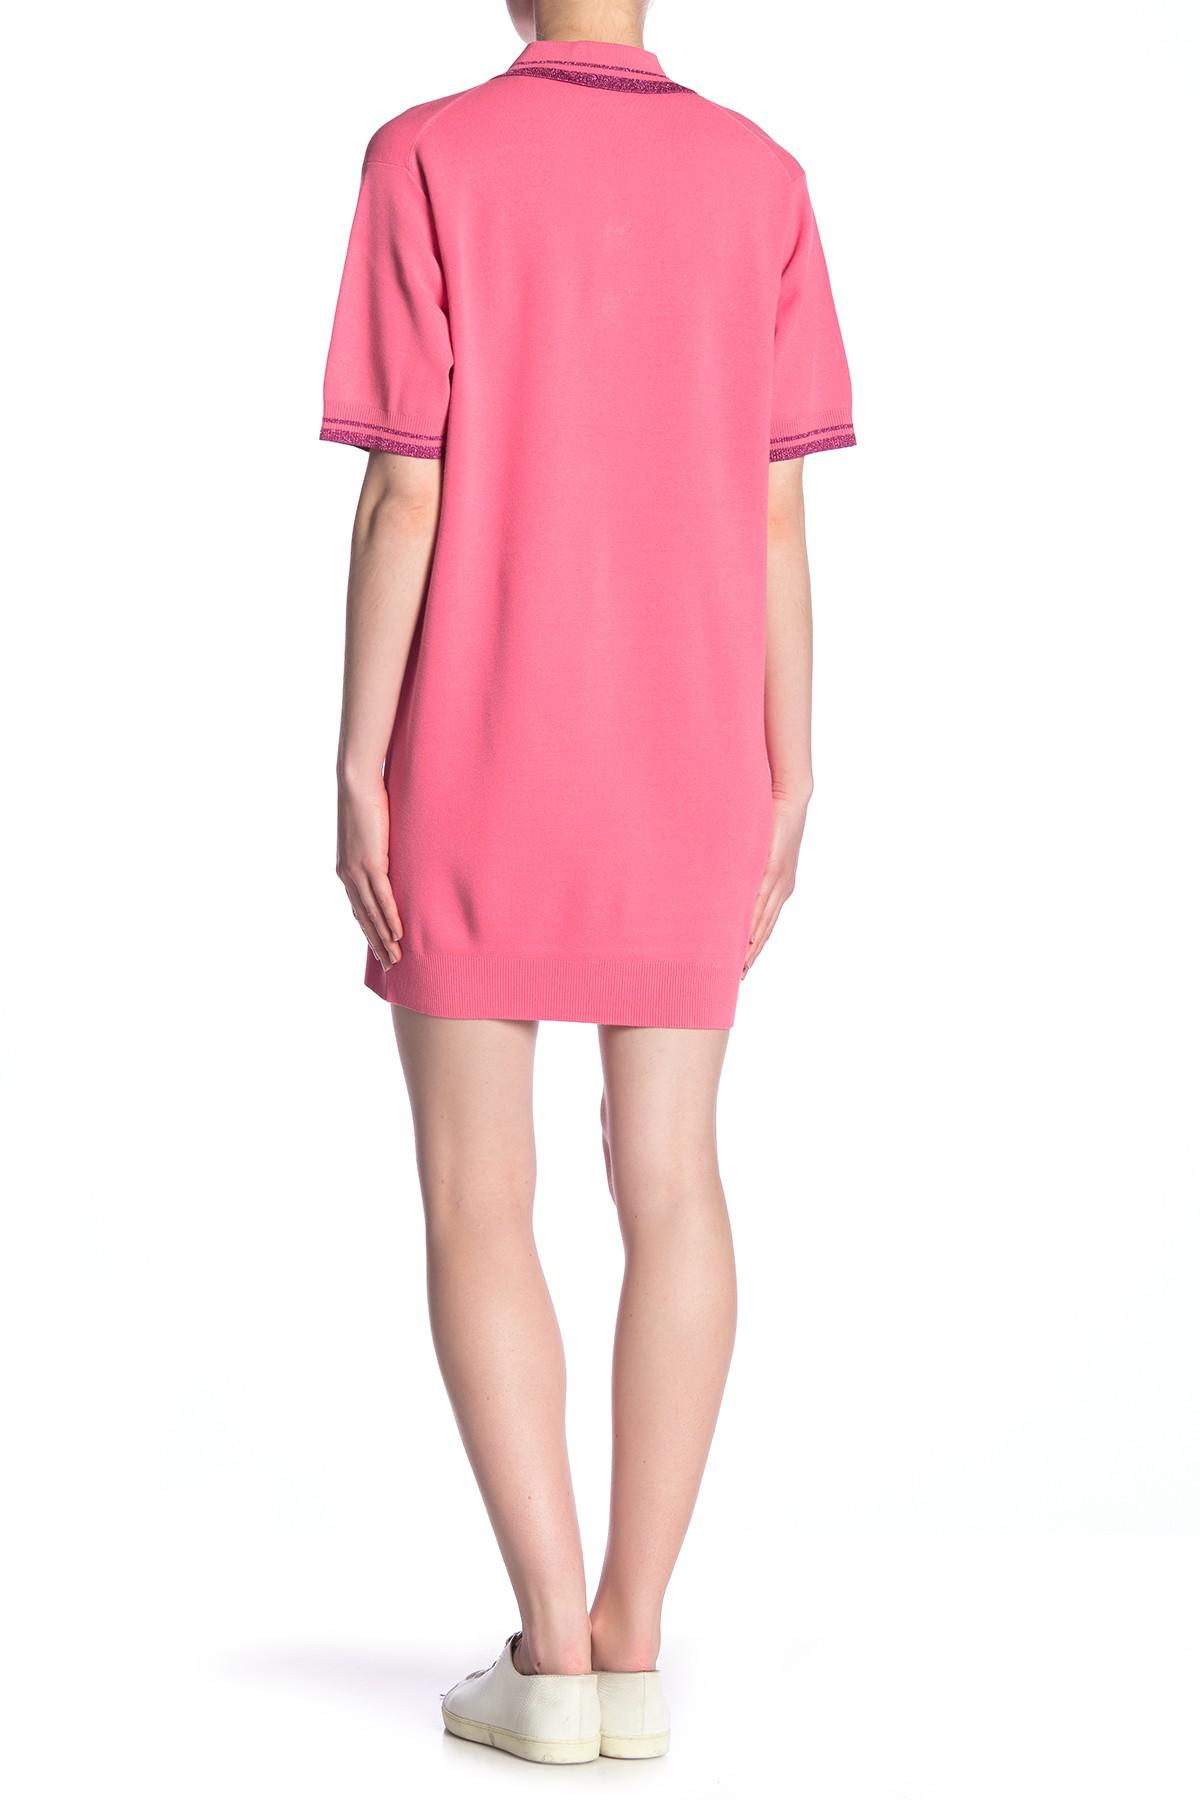 Marc Jacobs Flower Button Polo Shirt Dress in Pink | Lyst